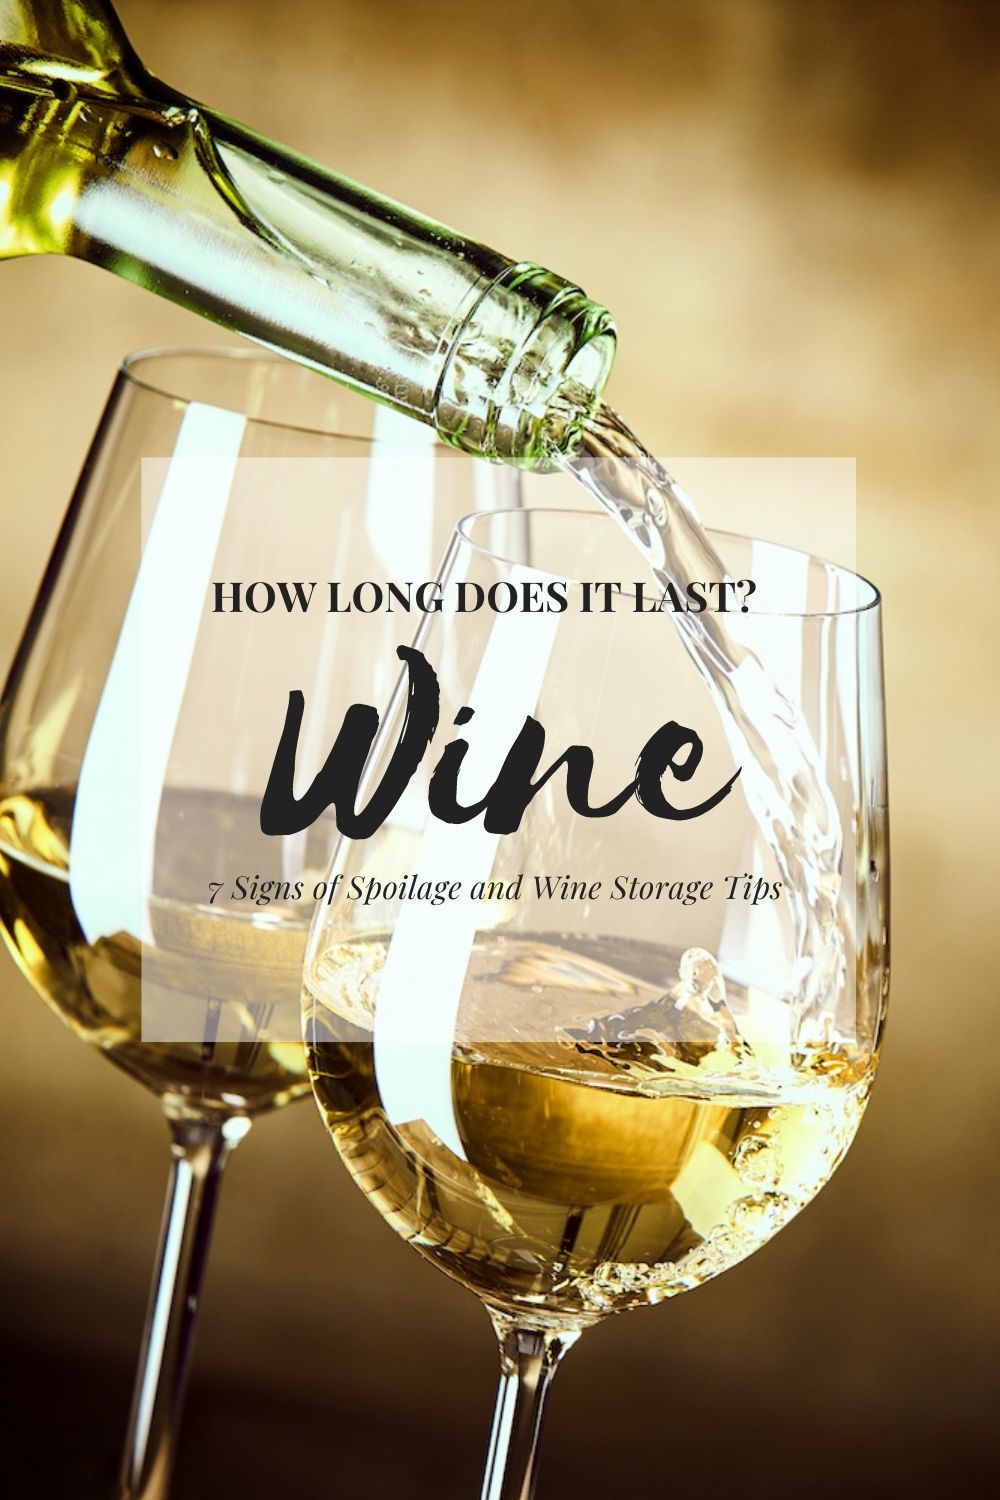 How Long Does Wine Last? 7 Signs of Spoilage and Wine Storage Tips